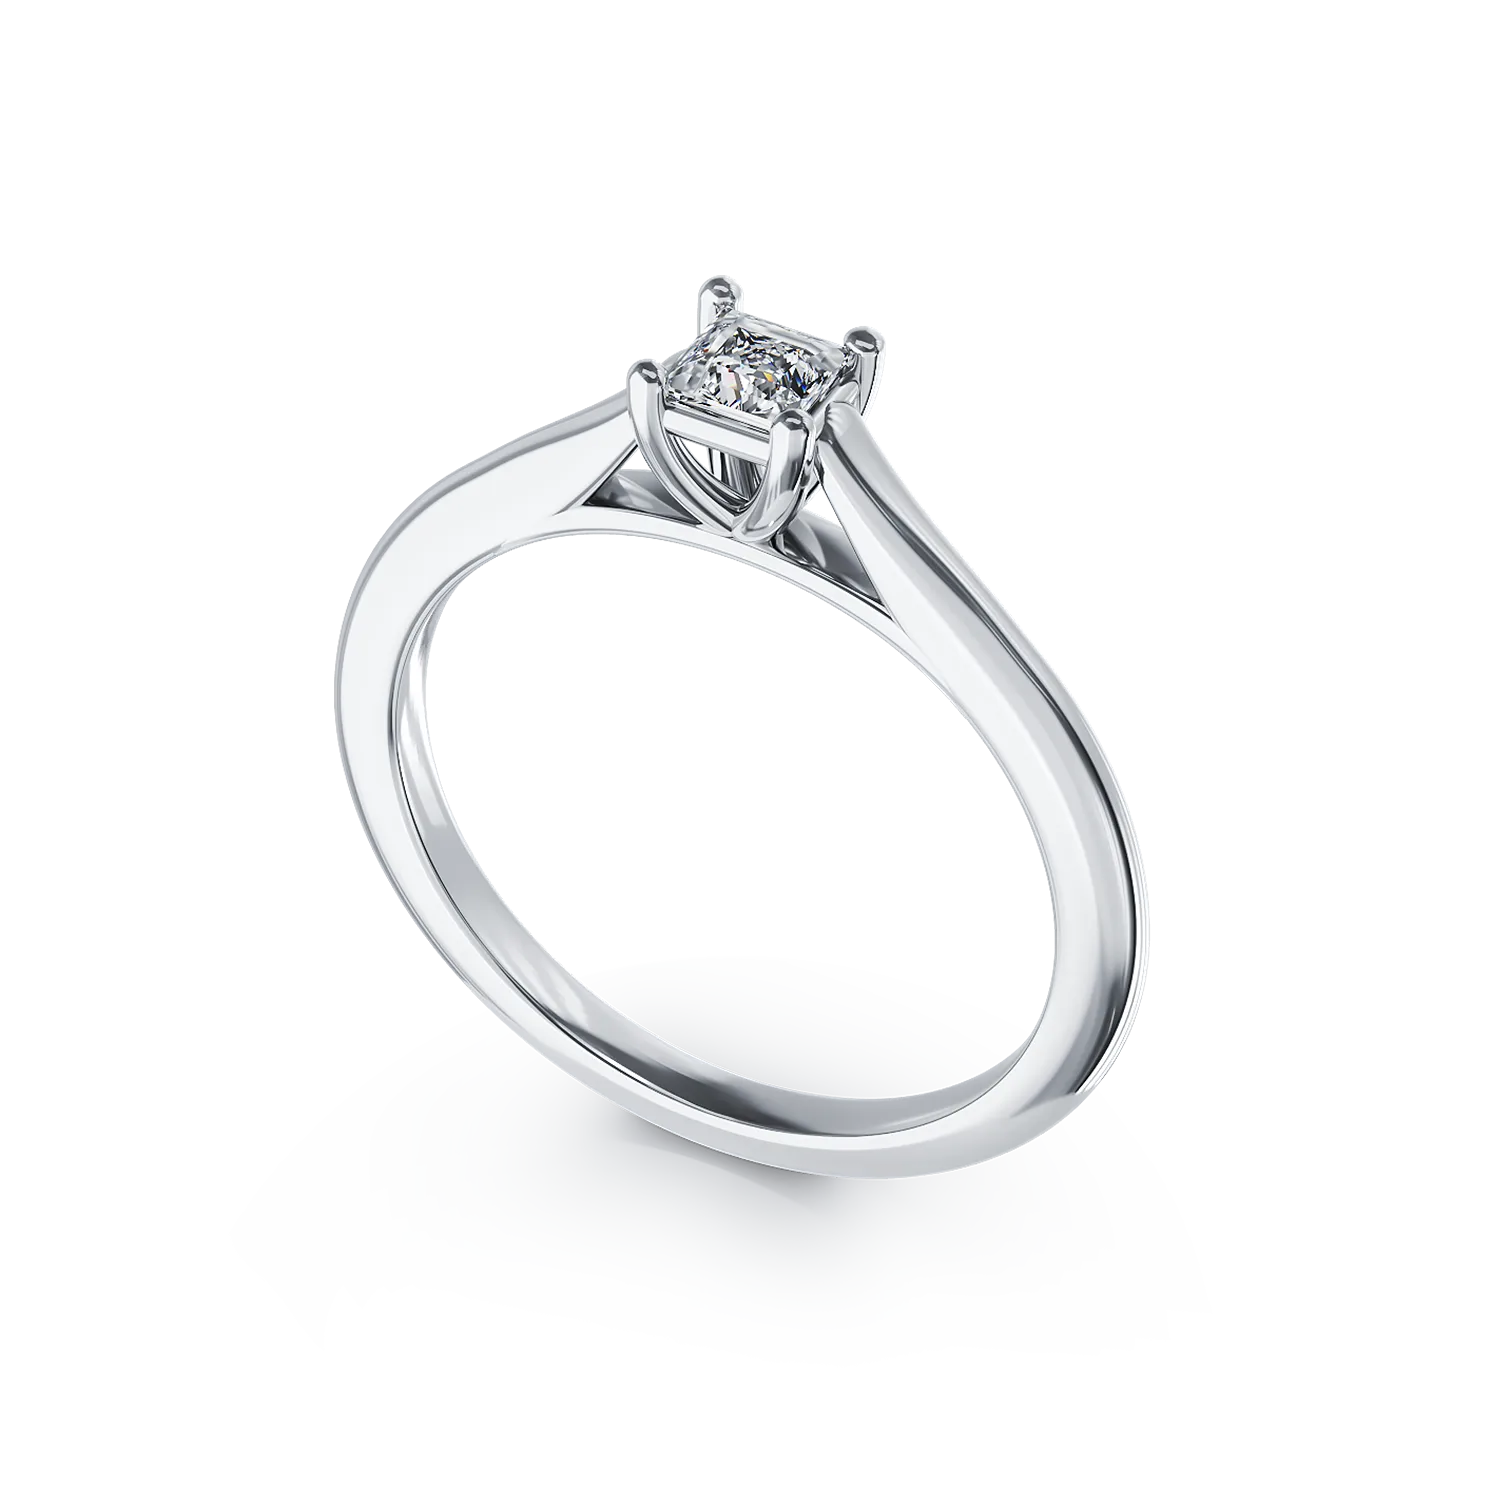 Platinum engagement ring with a 0.19ct solitaire diamond